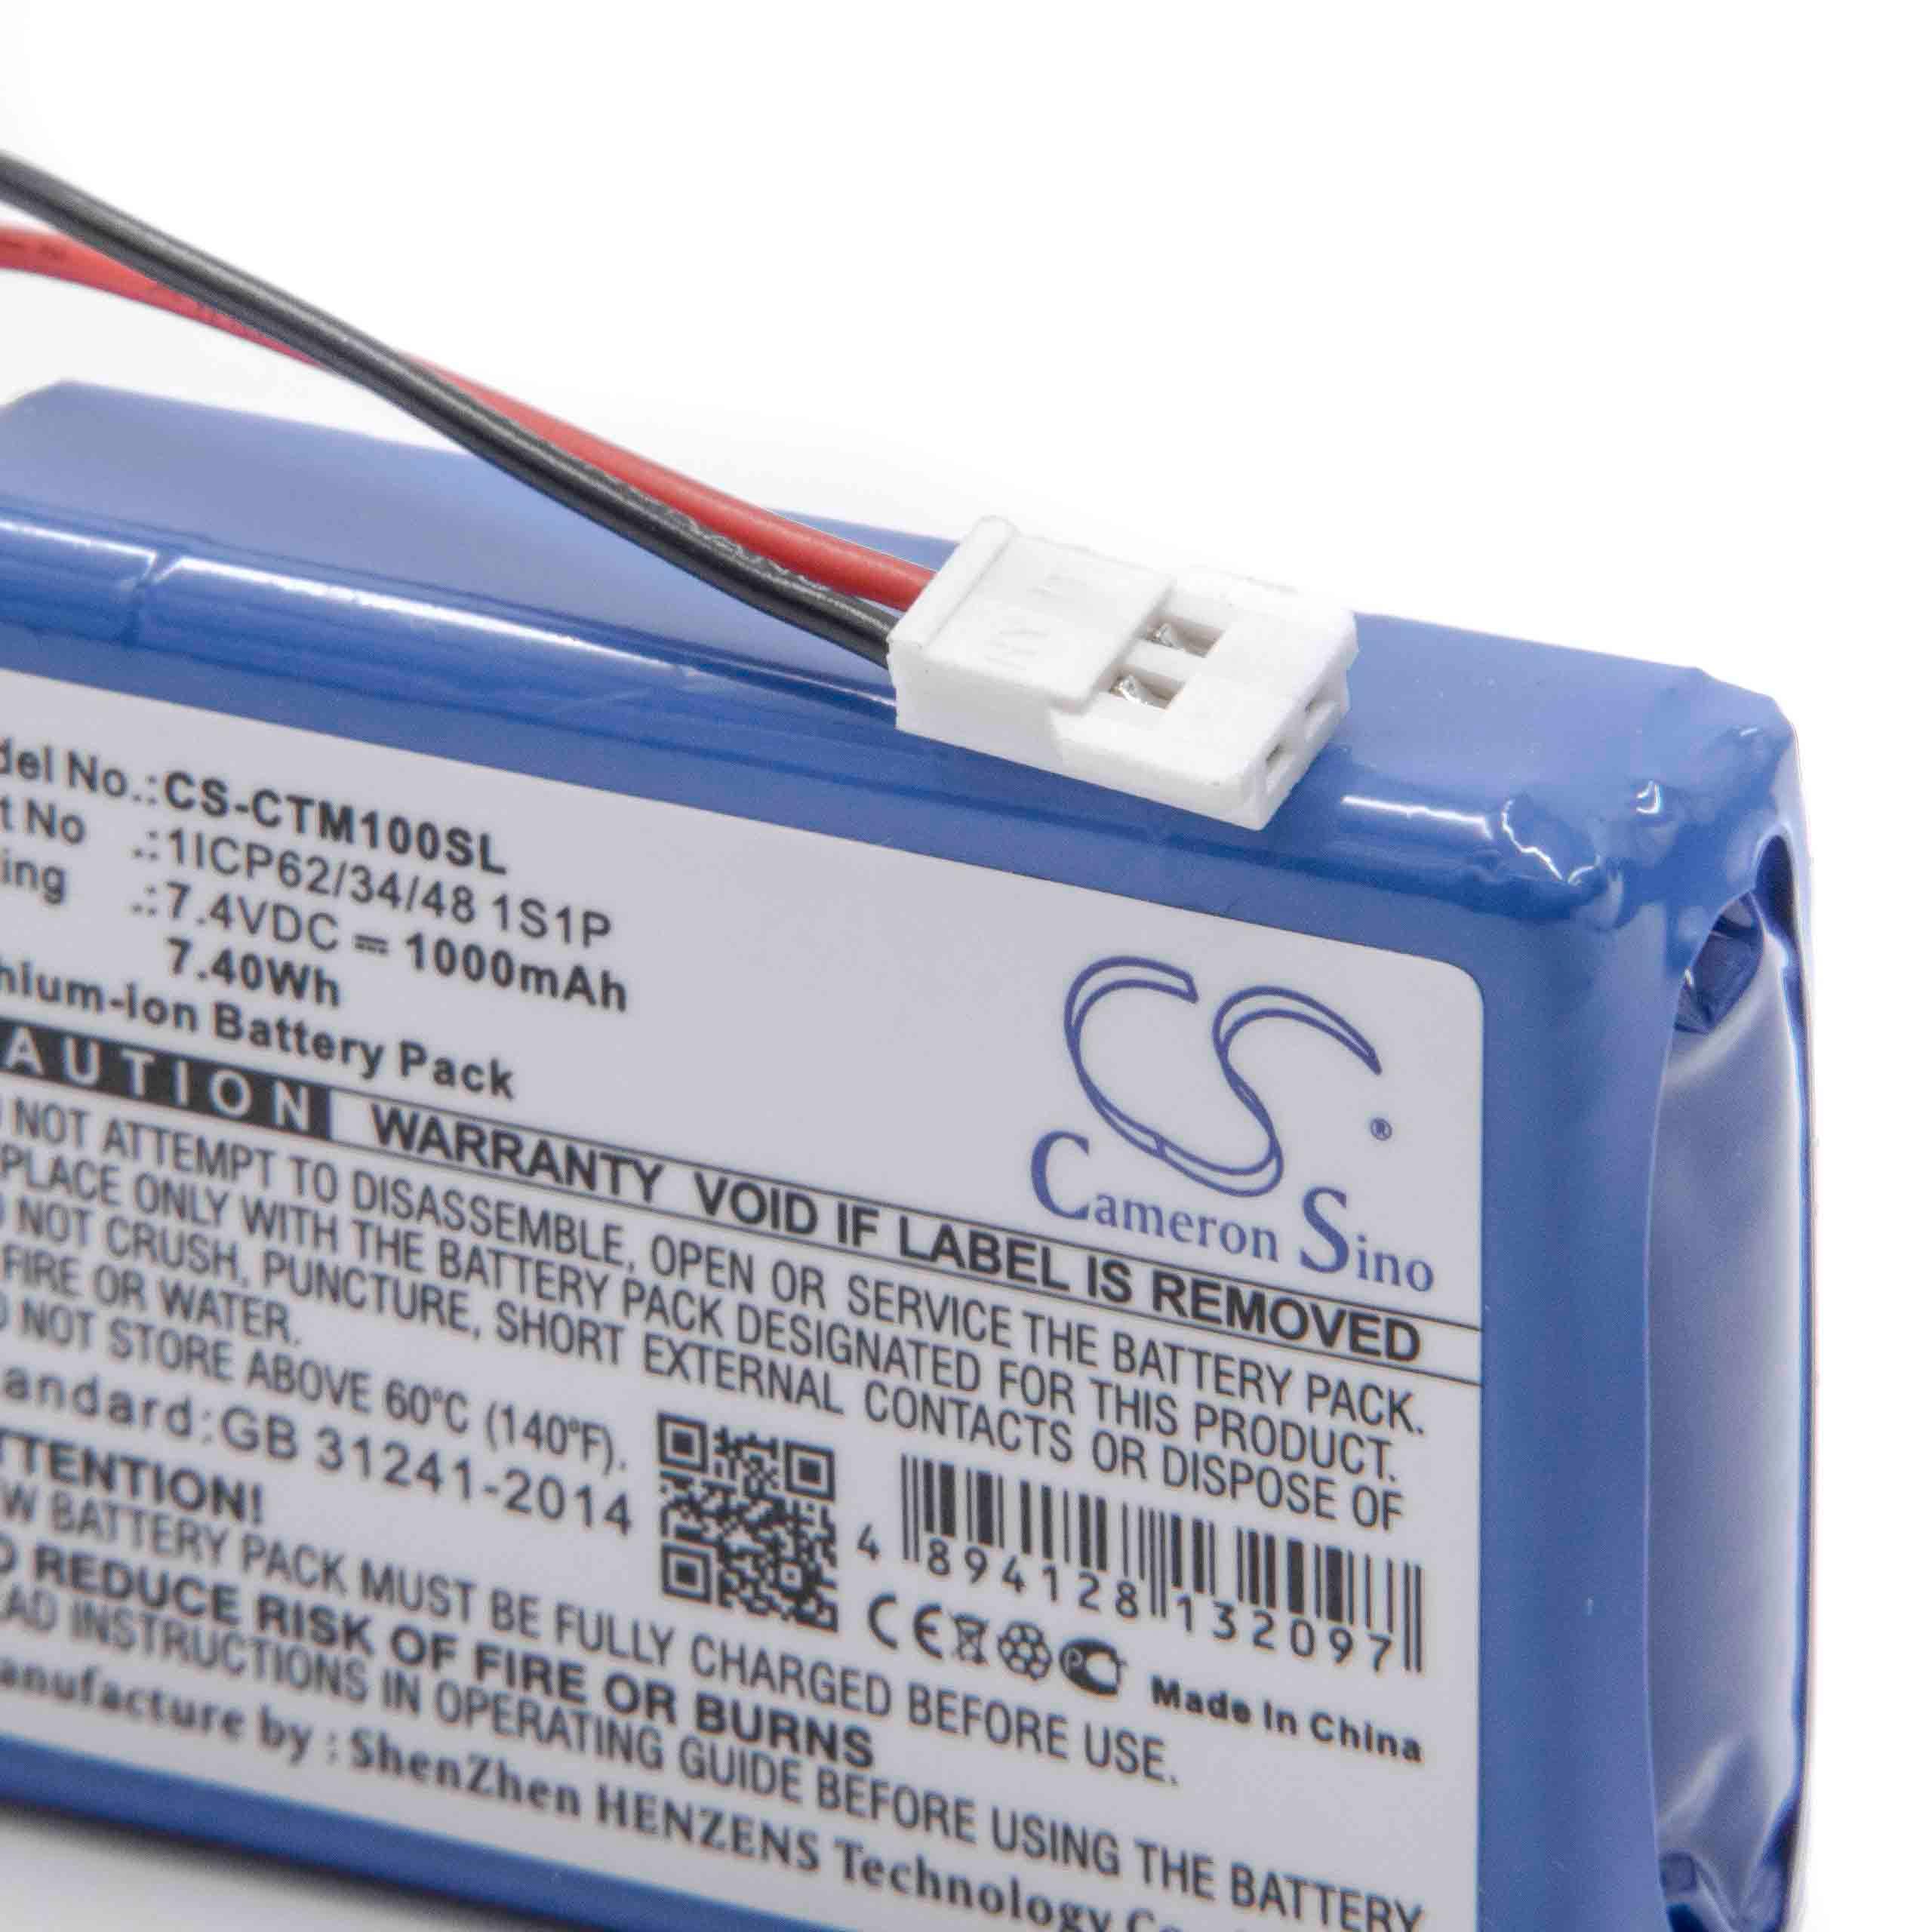 Banknote Validator Battery Replacement for CTMS 1ICP62/34/48 1S1P - 1000mAh 7.4V Li-Ion